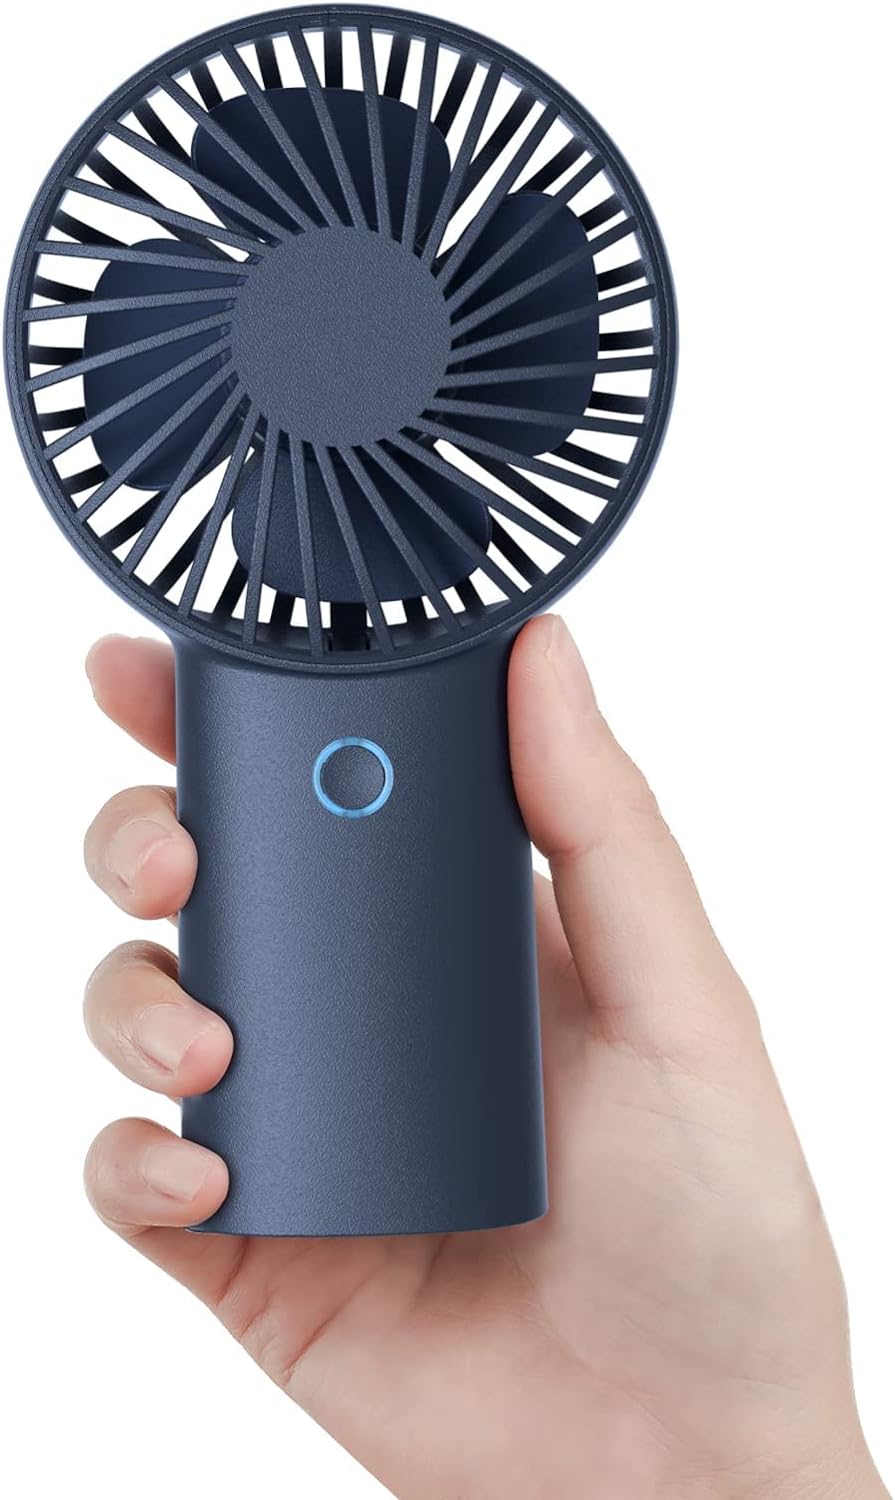 JISULIFE Handheld Mini Fan [20Hrs Cooling] USB Rechargeable 4000mAh Portable Fan, Battery Operated Hand Fan for Travel/Makeup/Eyelash/Camping/Home/Office, Ideal Gifts for Women, Men, Boys, Girls-Blue